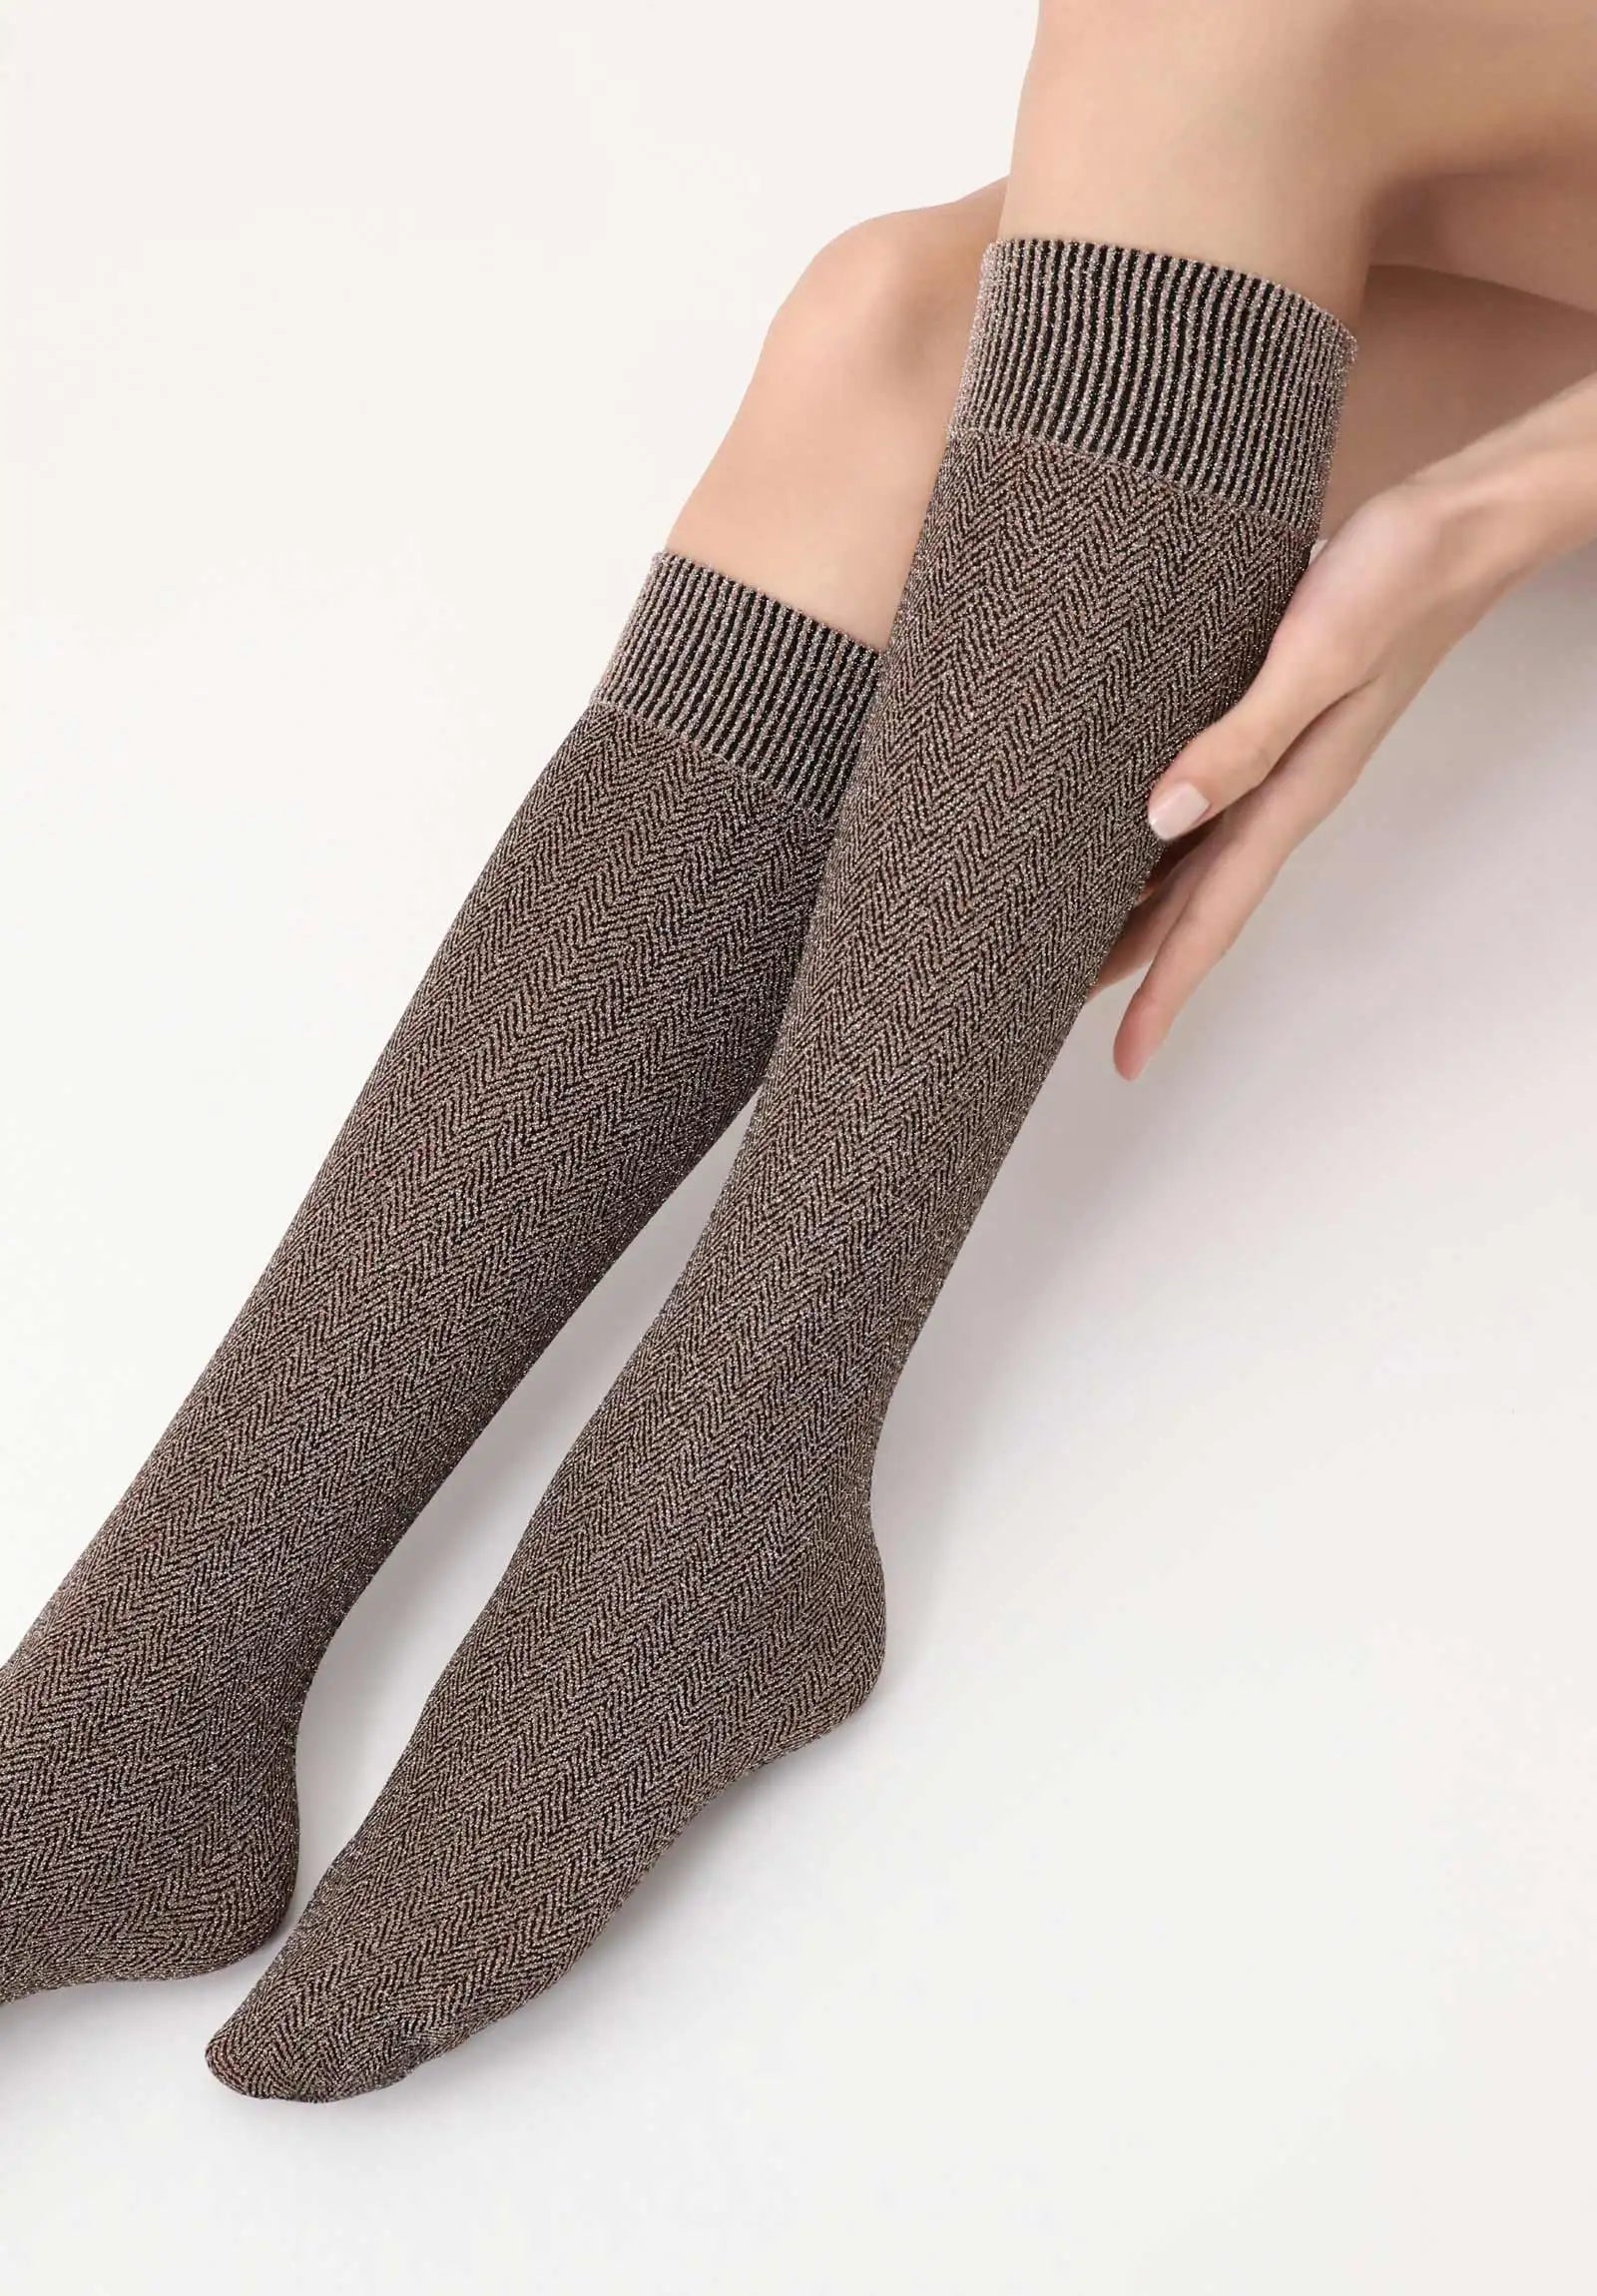 Oroblù Tweed Sparkly Knee Socks - Opaque two-toned tweed herringbone patterned fashion knee-high socks in beige and black with sparkly silver lamé and light ribbed elasticated comfort cuff.